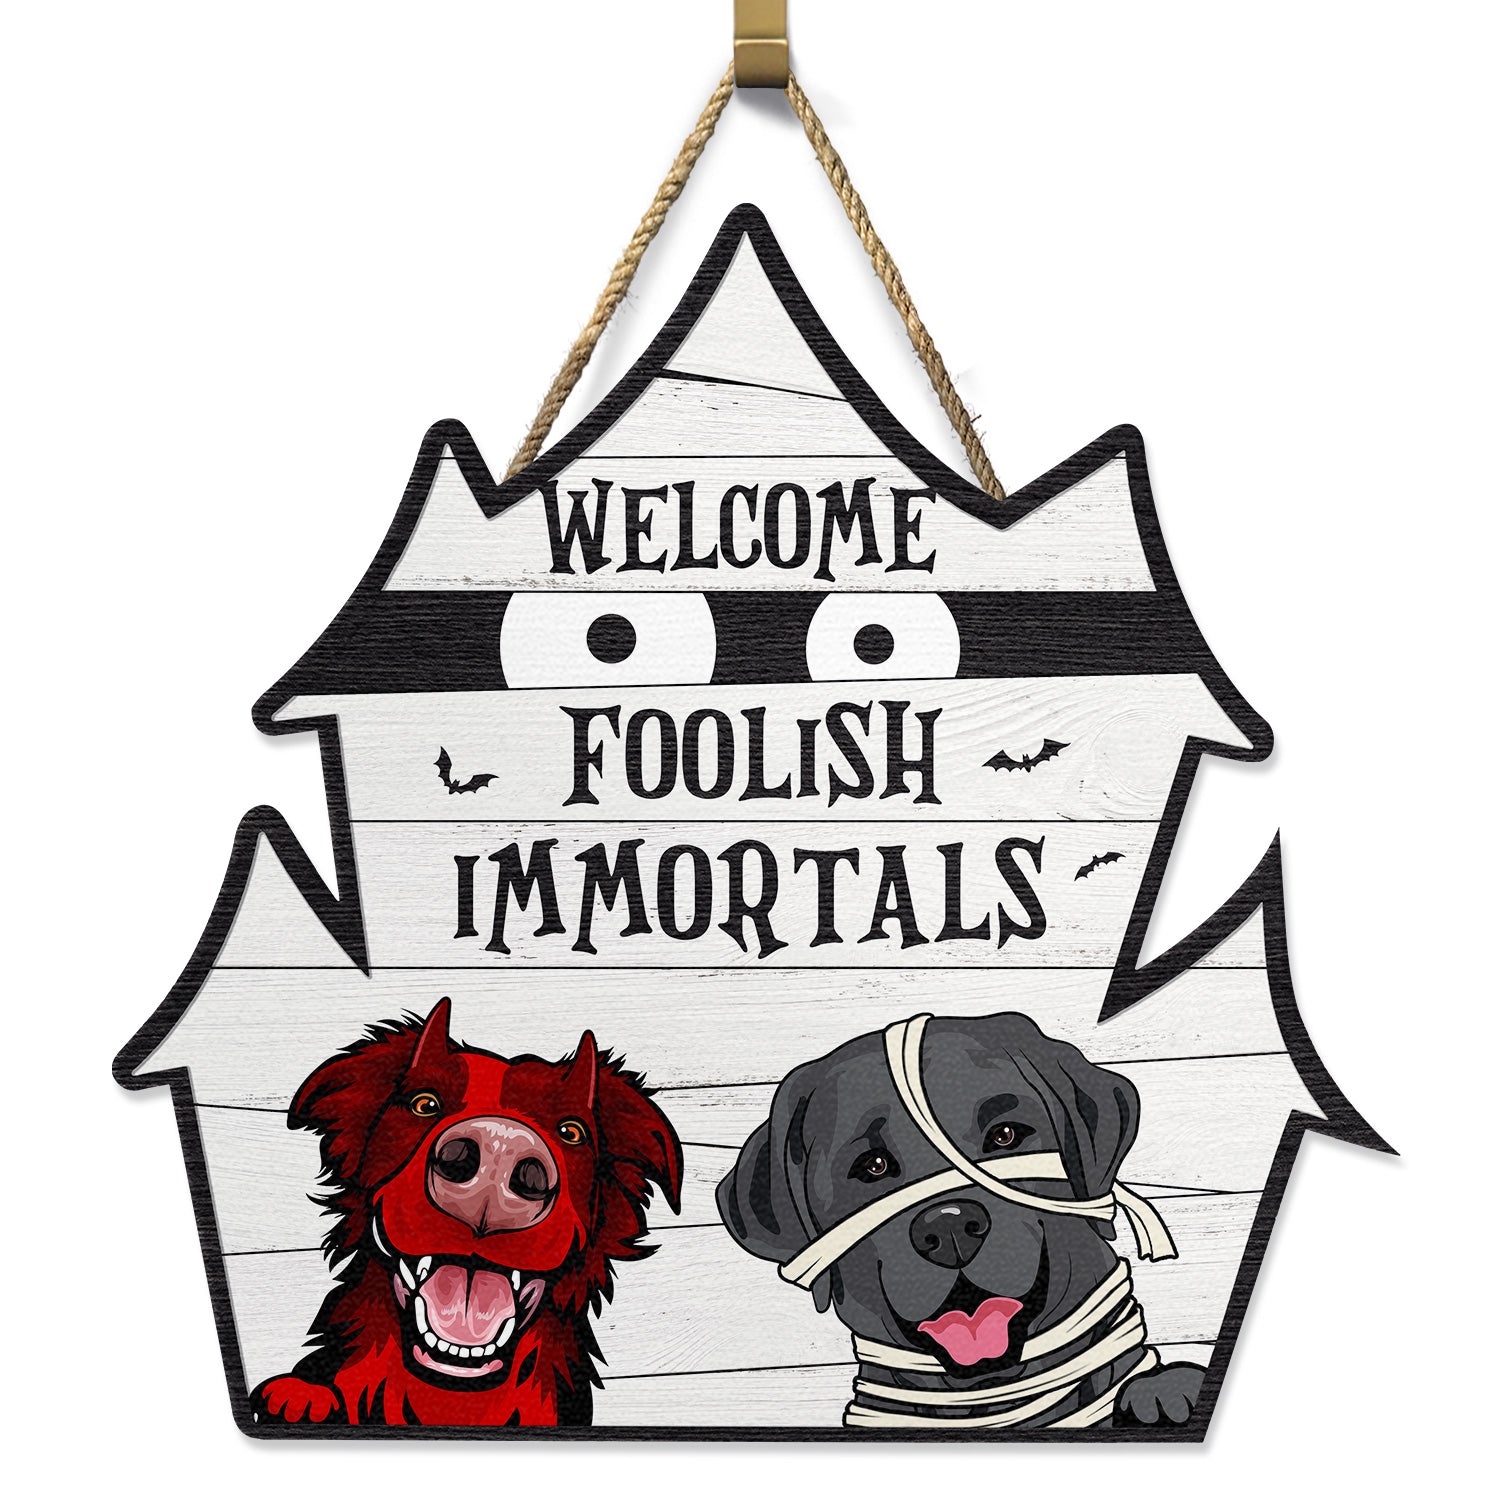 Welcome Foolish Immortals - Gift For Dog Lovers - Personalized Custom Shaped Wood Sign